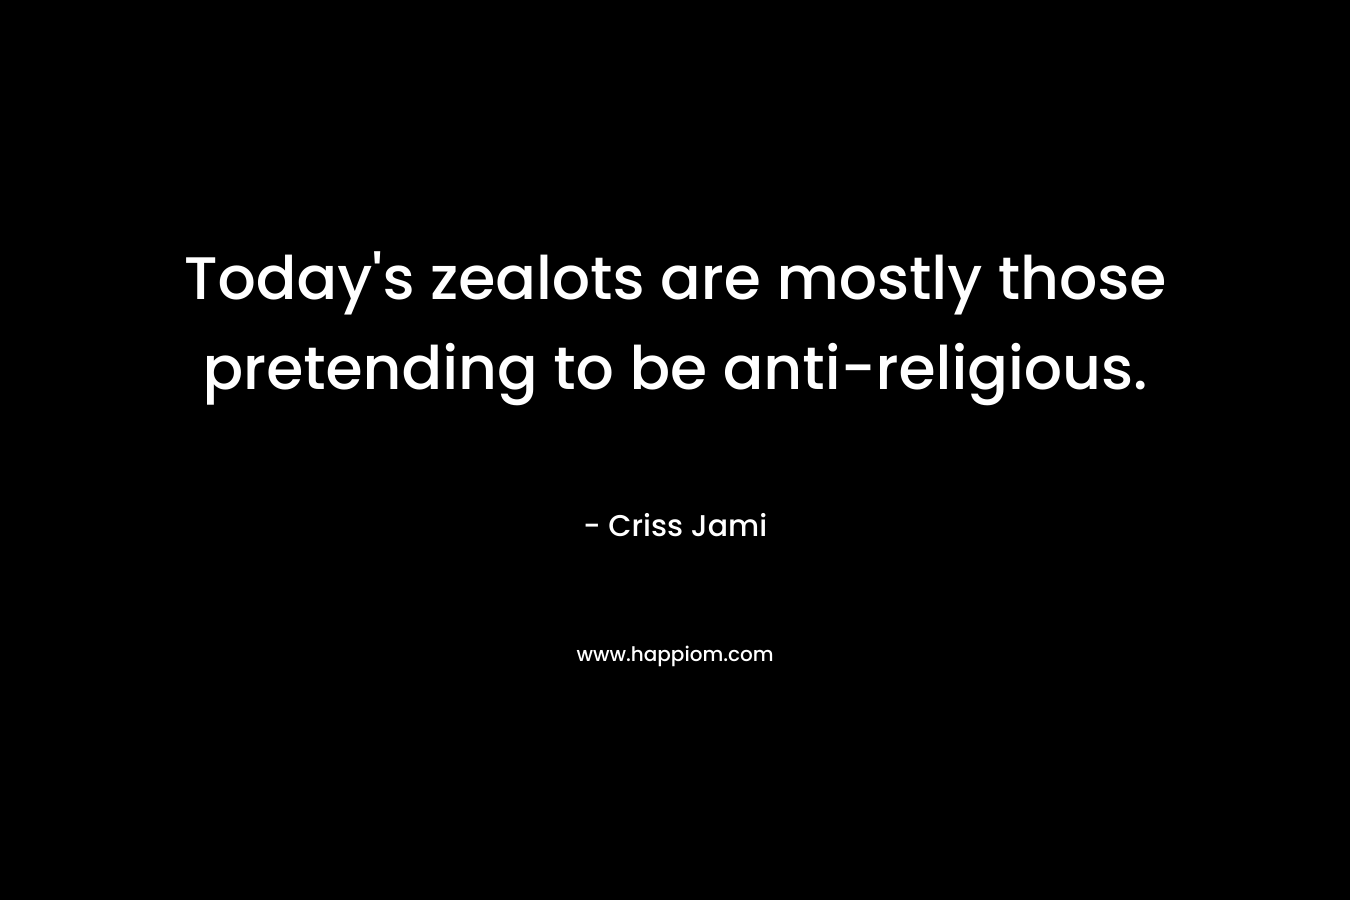 Today’s zealots are mostly those pretending to be anti-religious. – Criss Jami